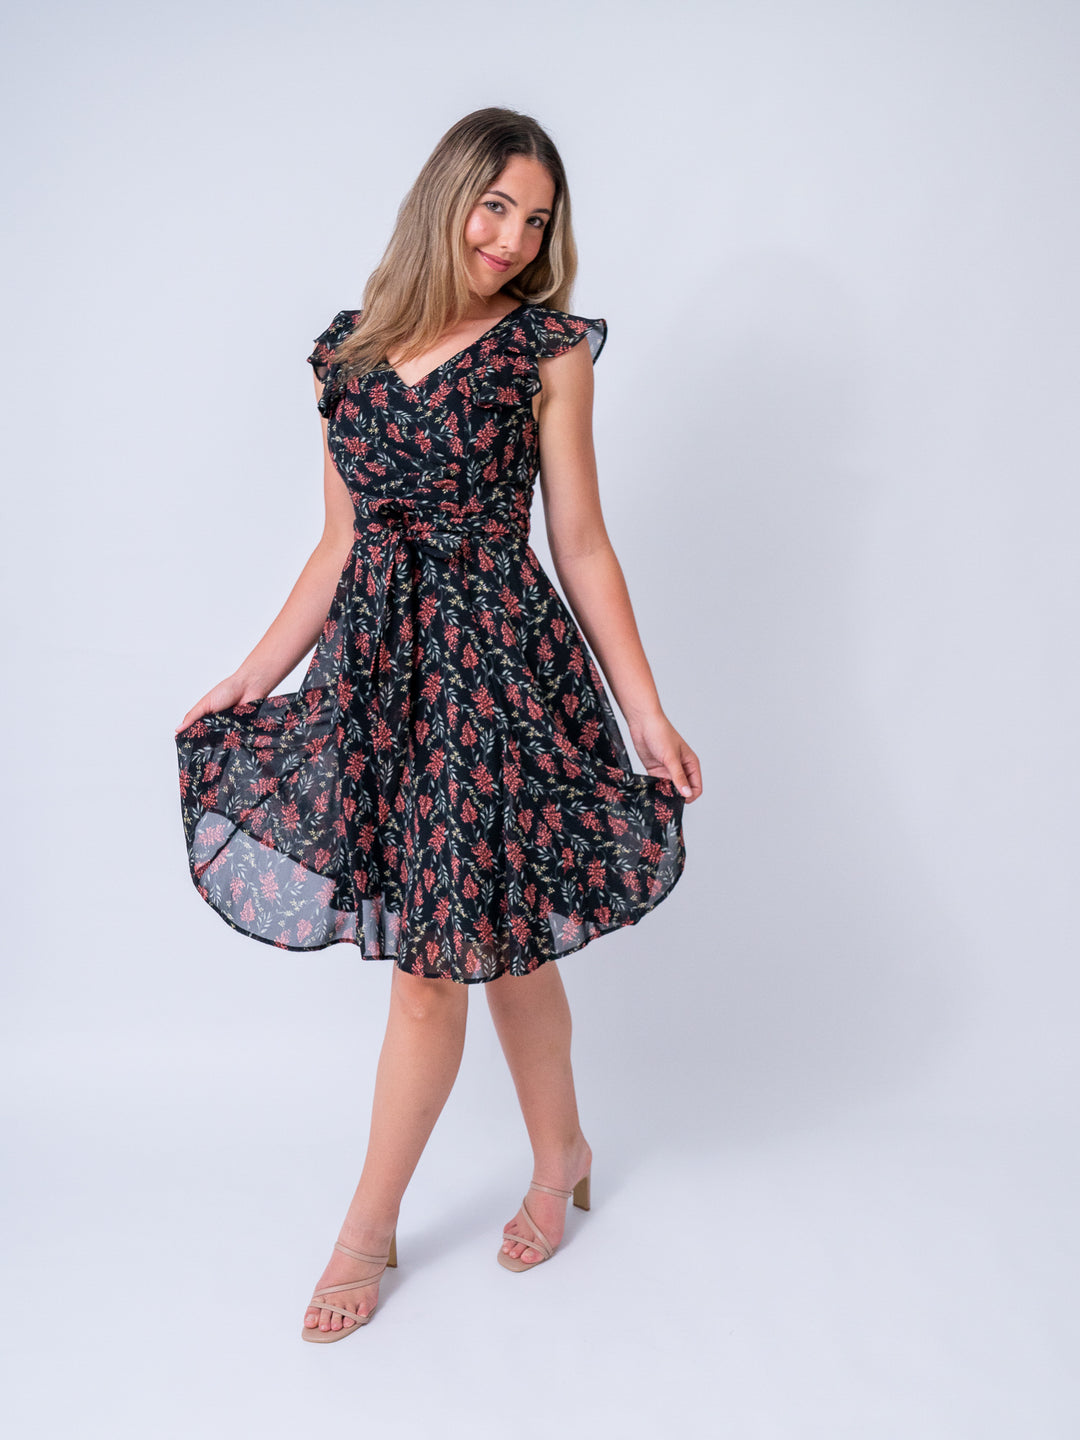 lorna dress black base with wine colour bunches